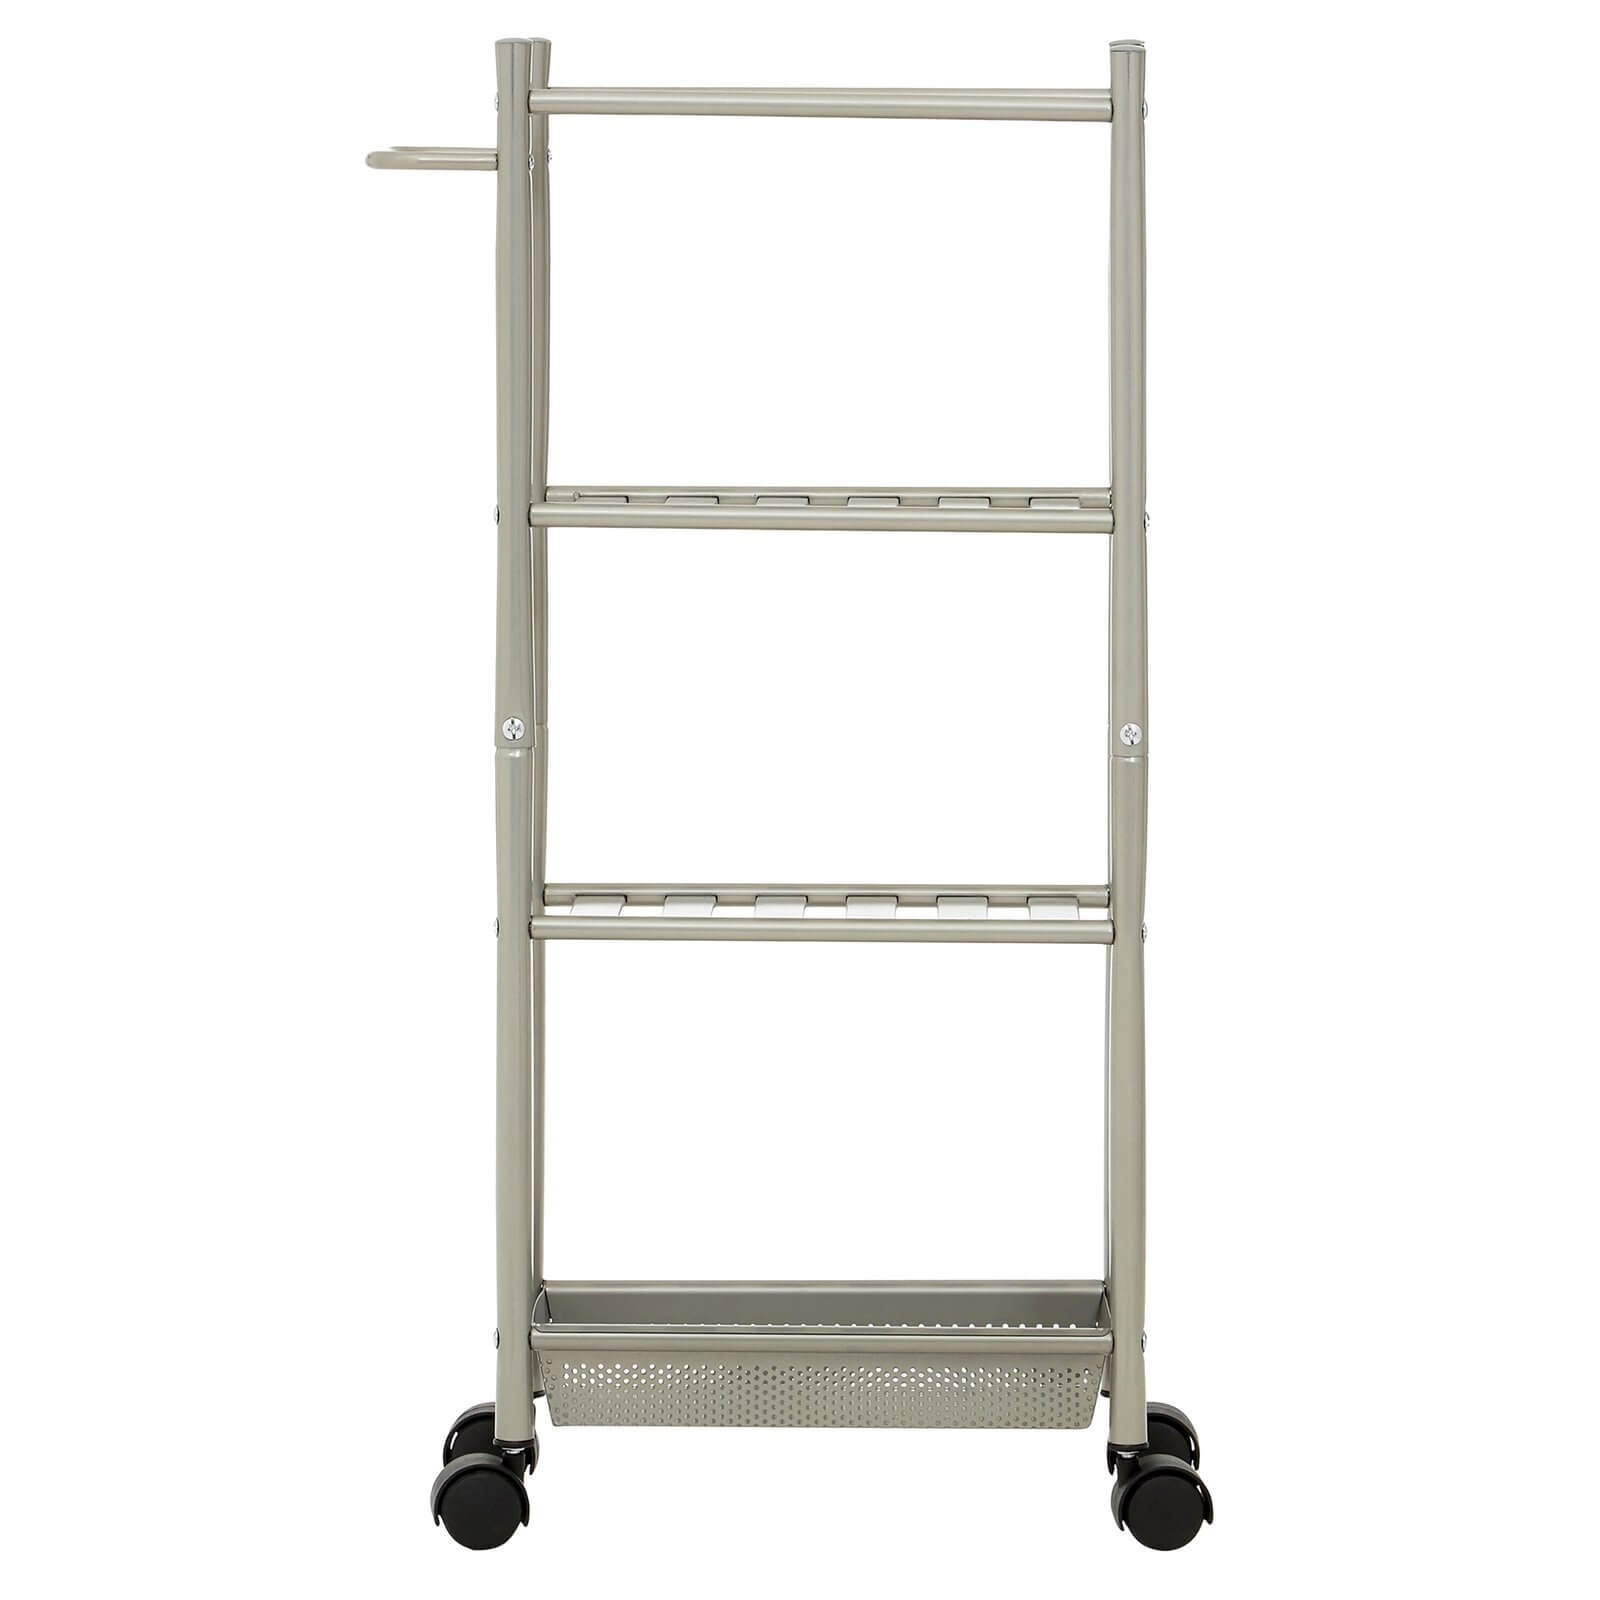 4 Tier Kitchen Trolley with Basket - Brushed Nickel